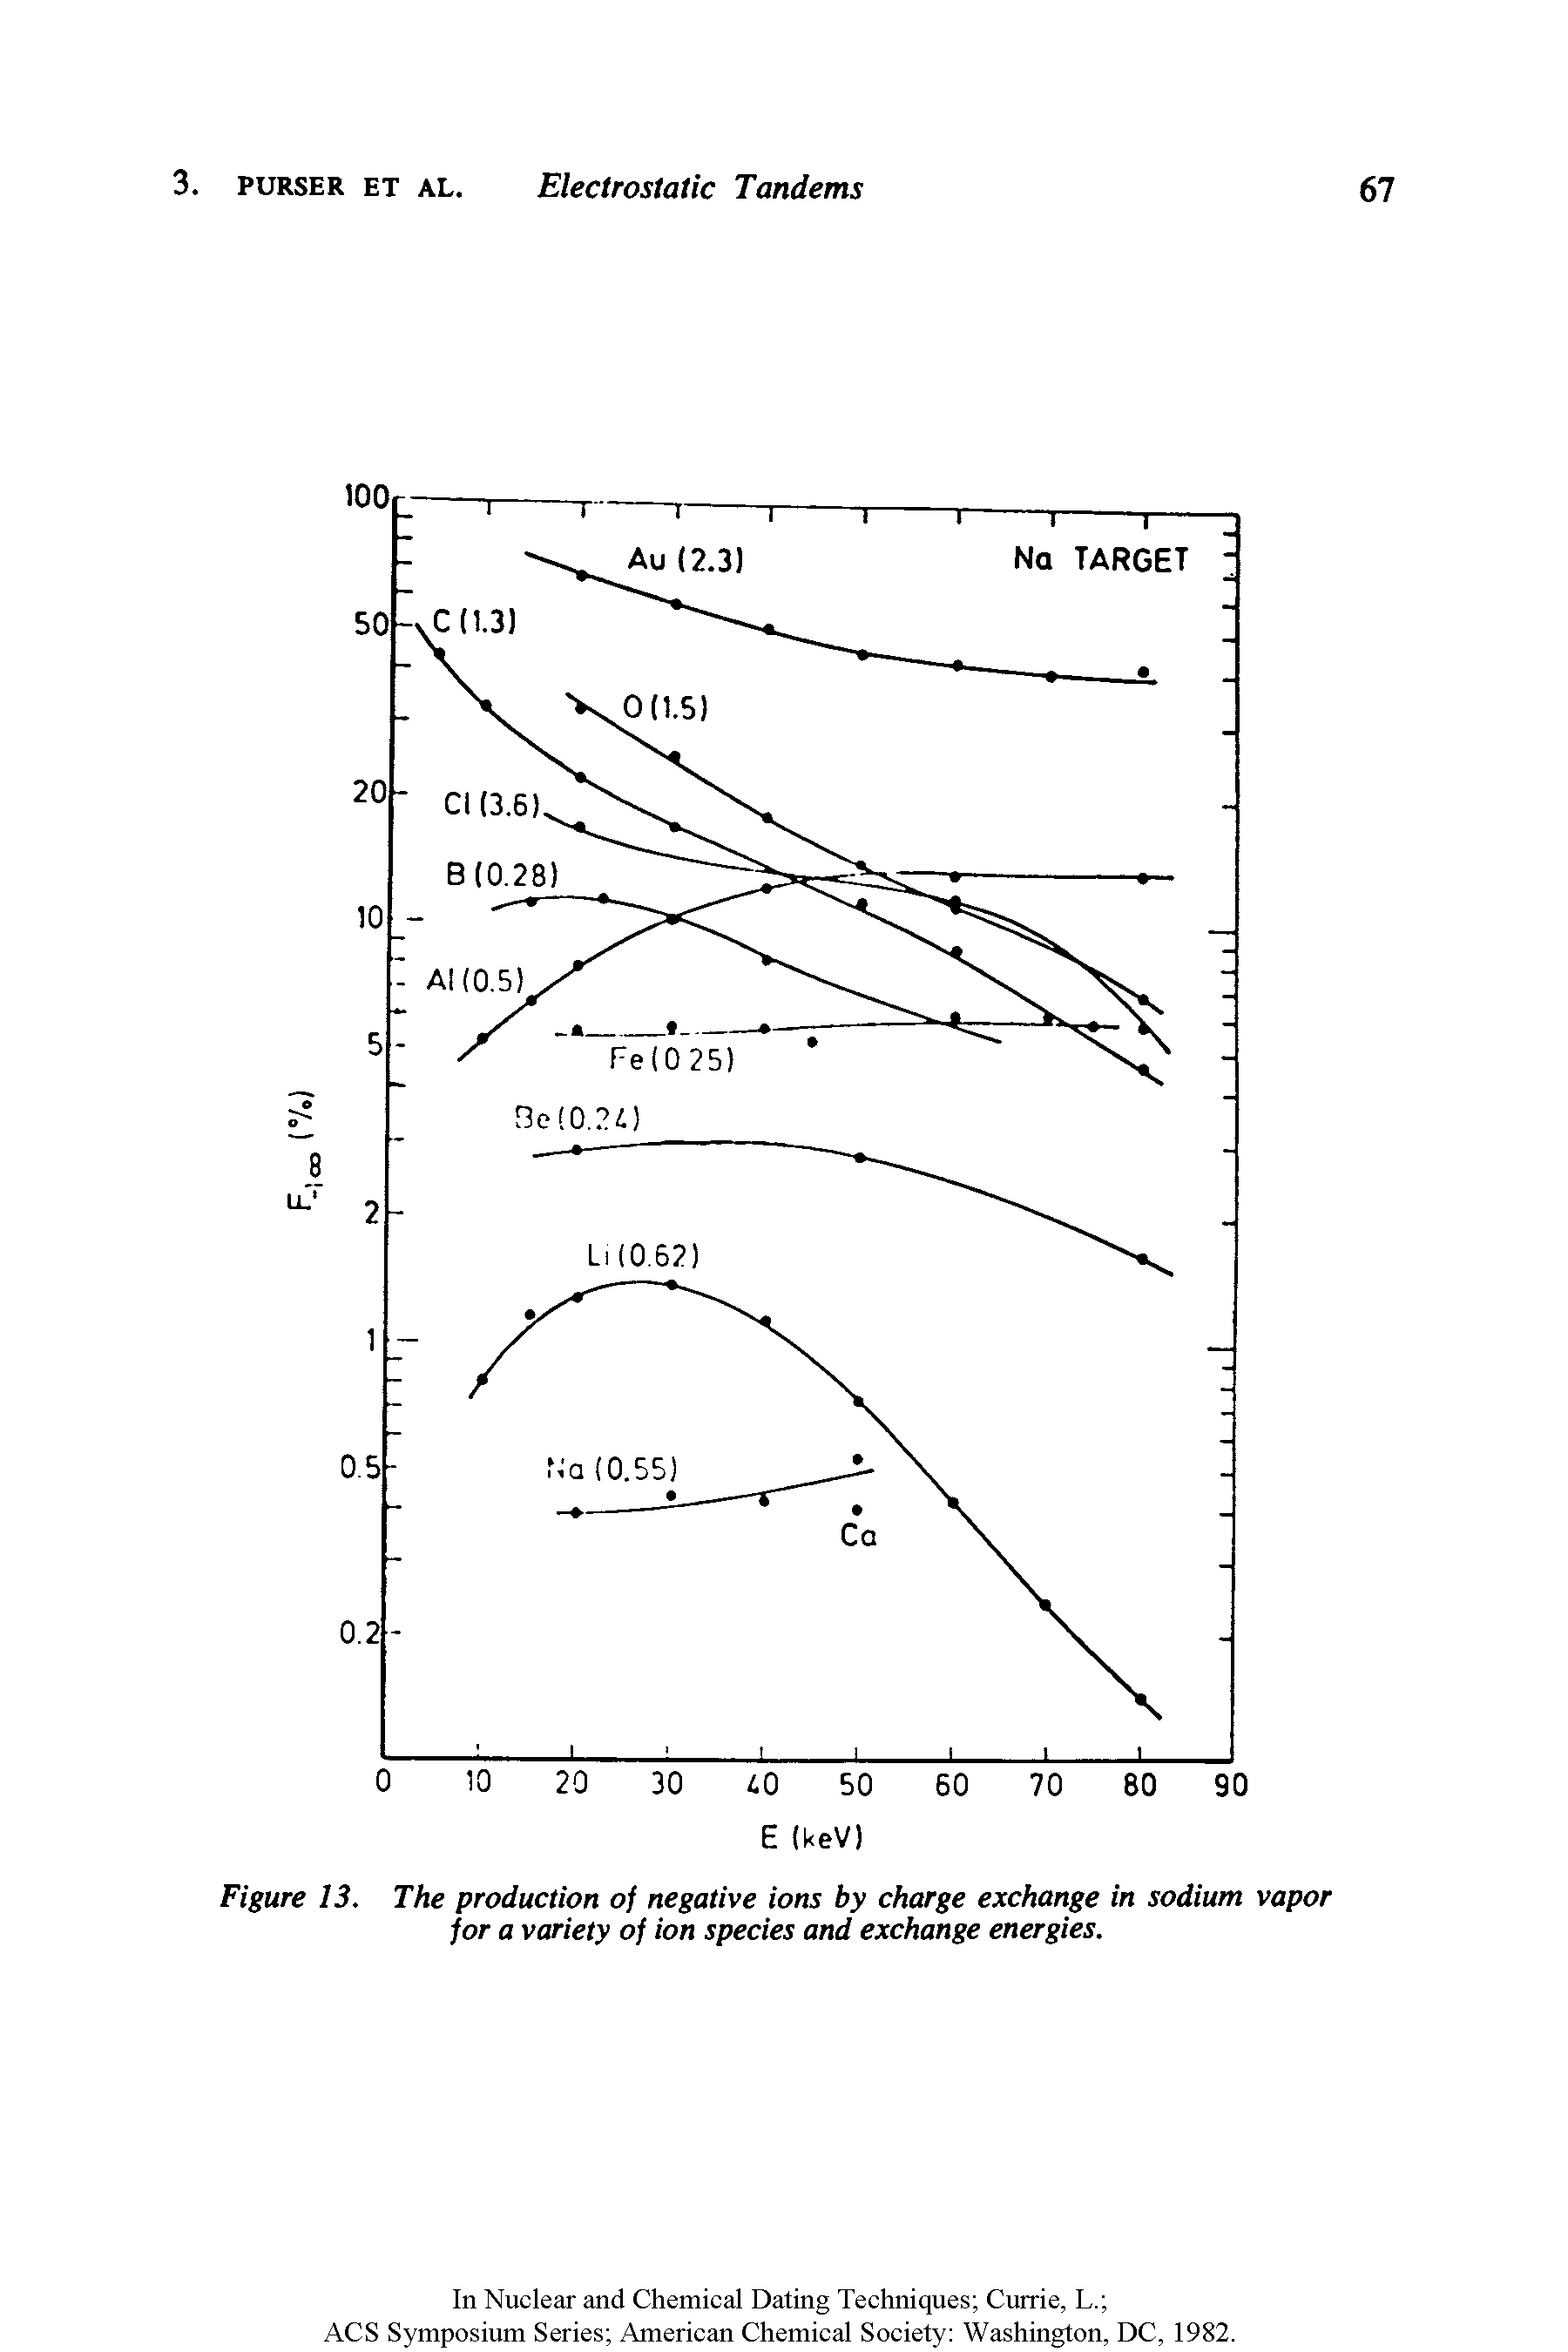 Figure 13. The production of negative ions by charge exchange in sodium vapor for a variety of ion species and exchange energies.